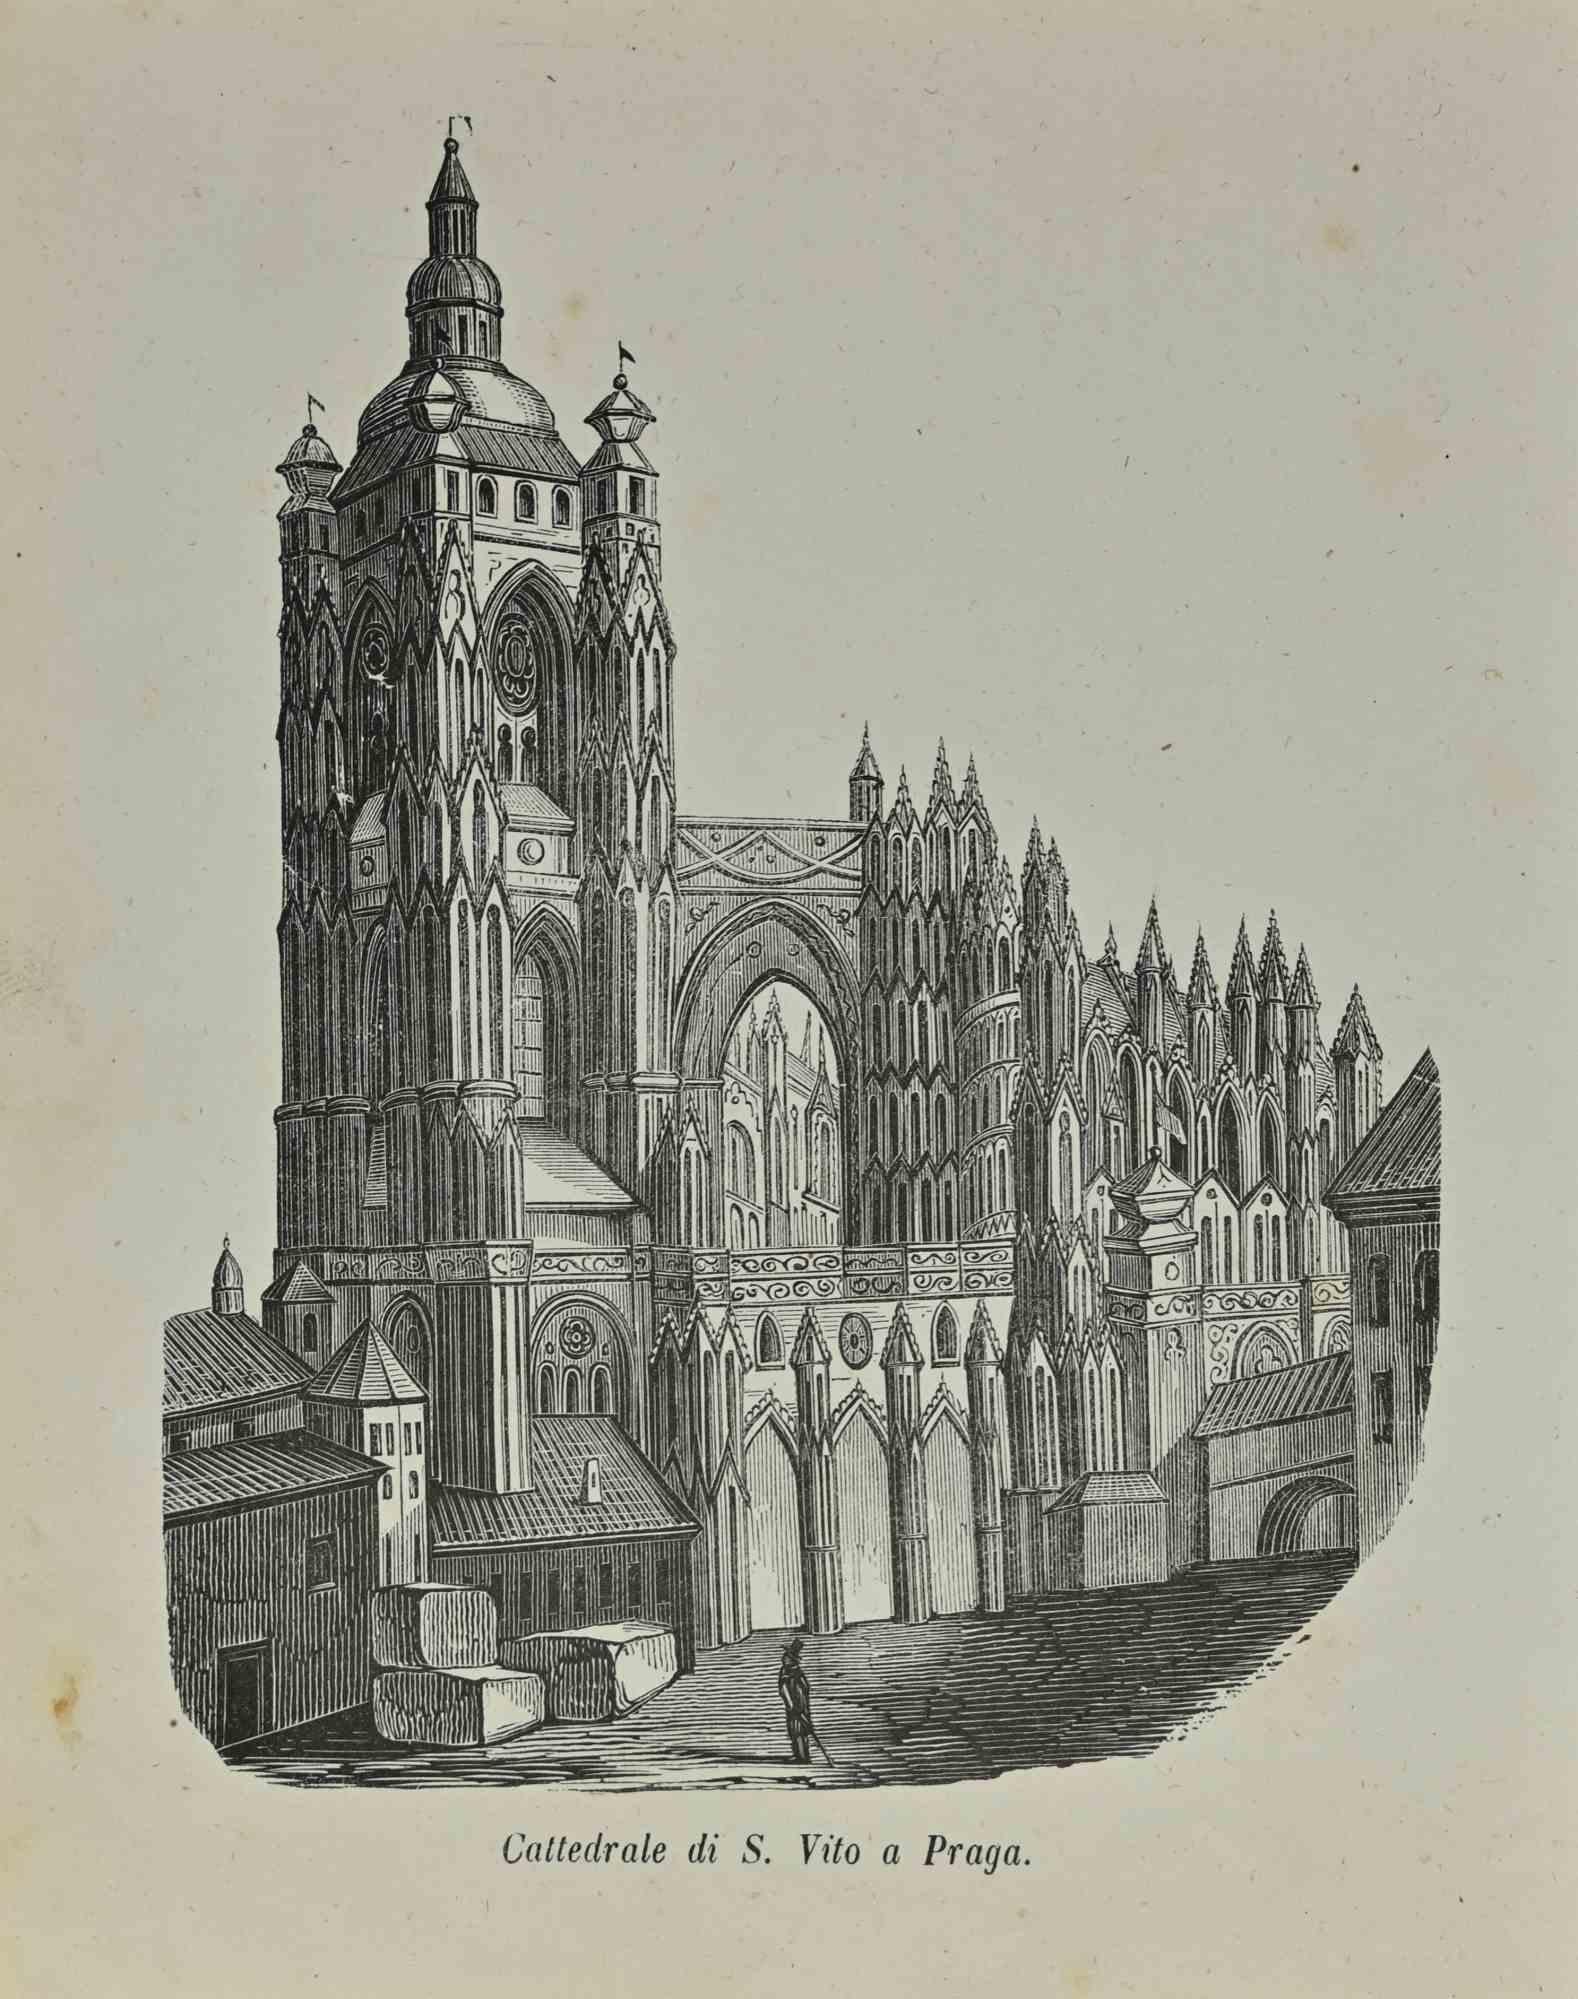 St. Vitus Cathedral in Prague is a lithograph made by Auguste Wahlen in 1844.

Good condition.

Drawing in black and white.

At the center of the artwork is the original title "Cattedrale di S. Vito a Praga".

The work is part of Suite Moeurs,